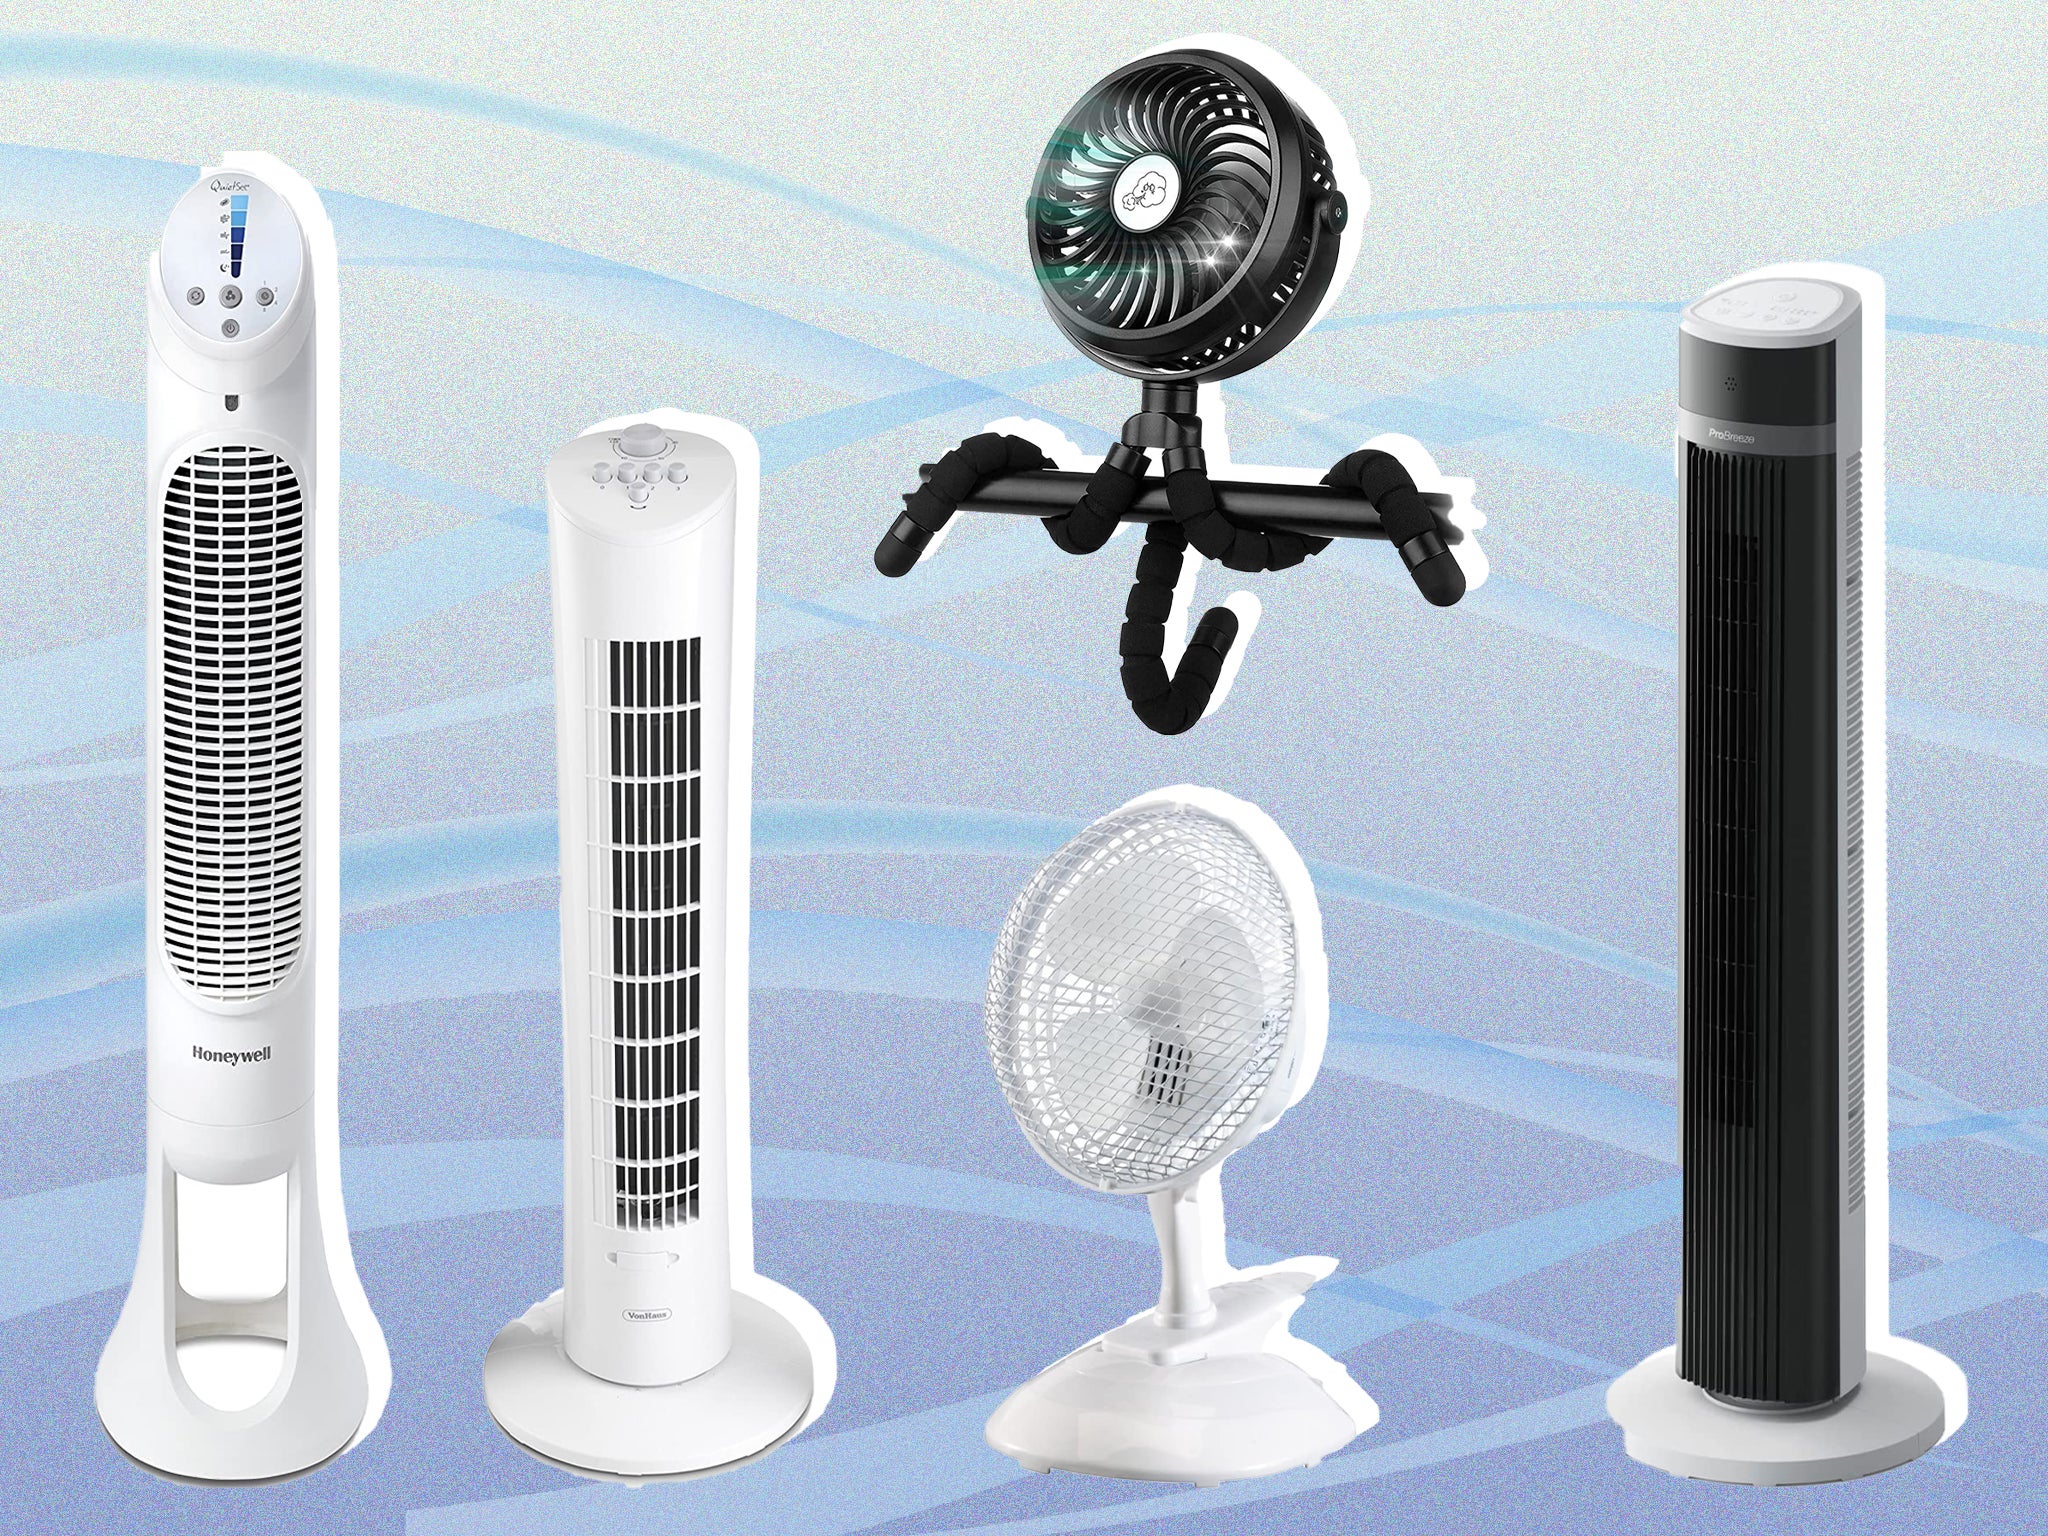 Whether you’re working from home or wilting on the commute, these fans have you covered